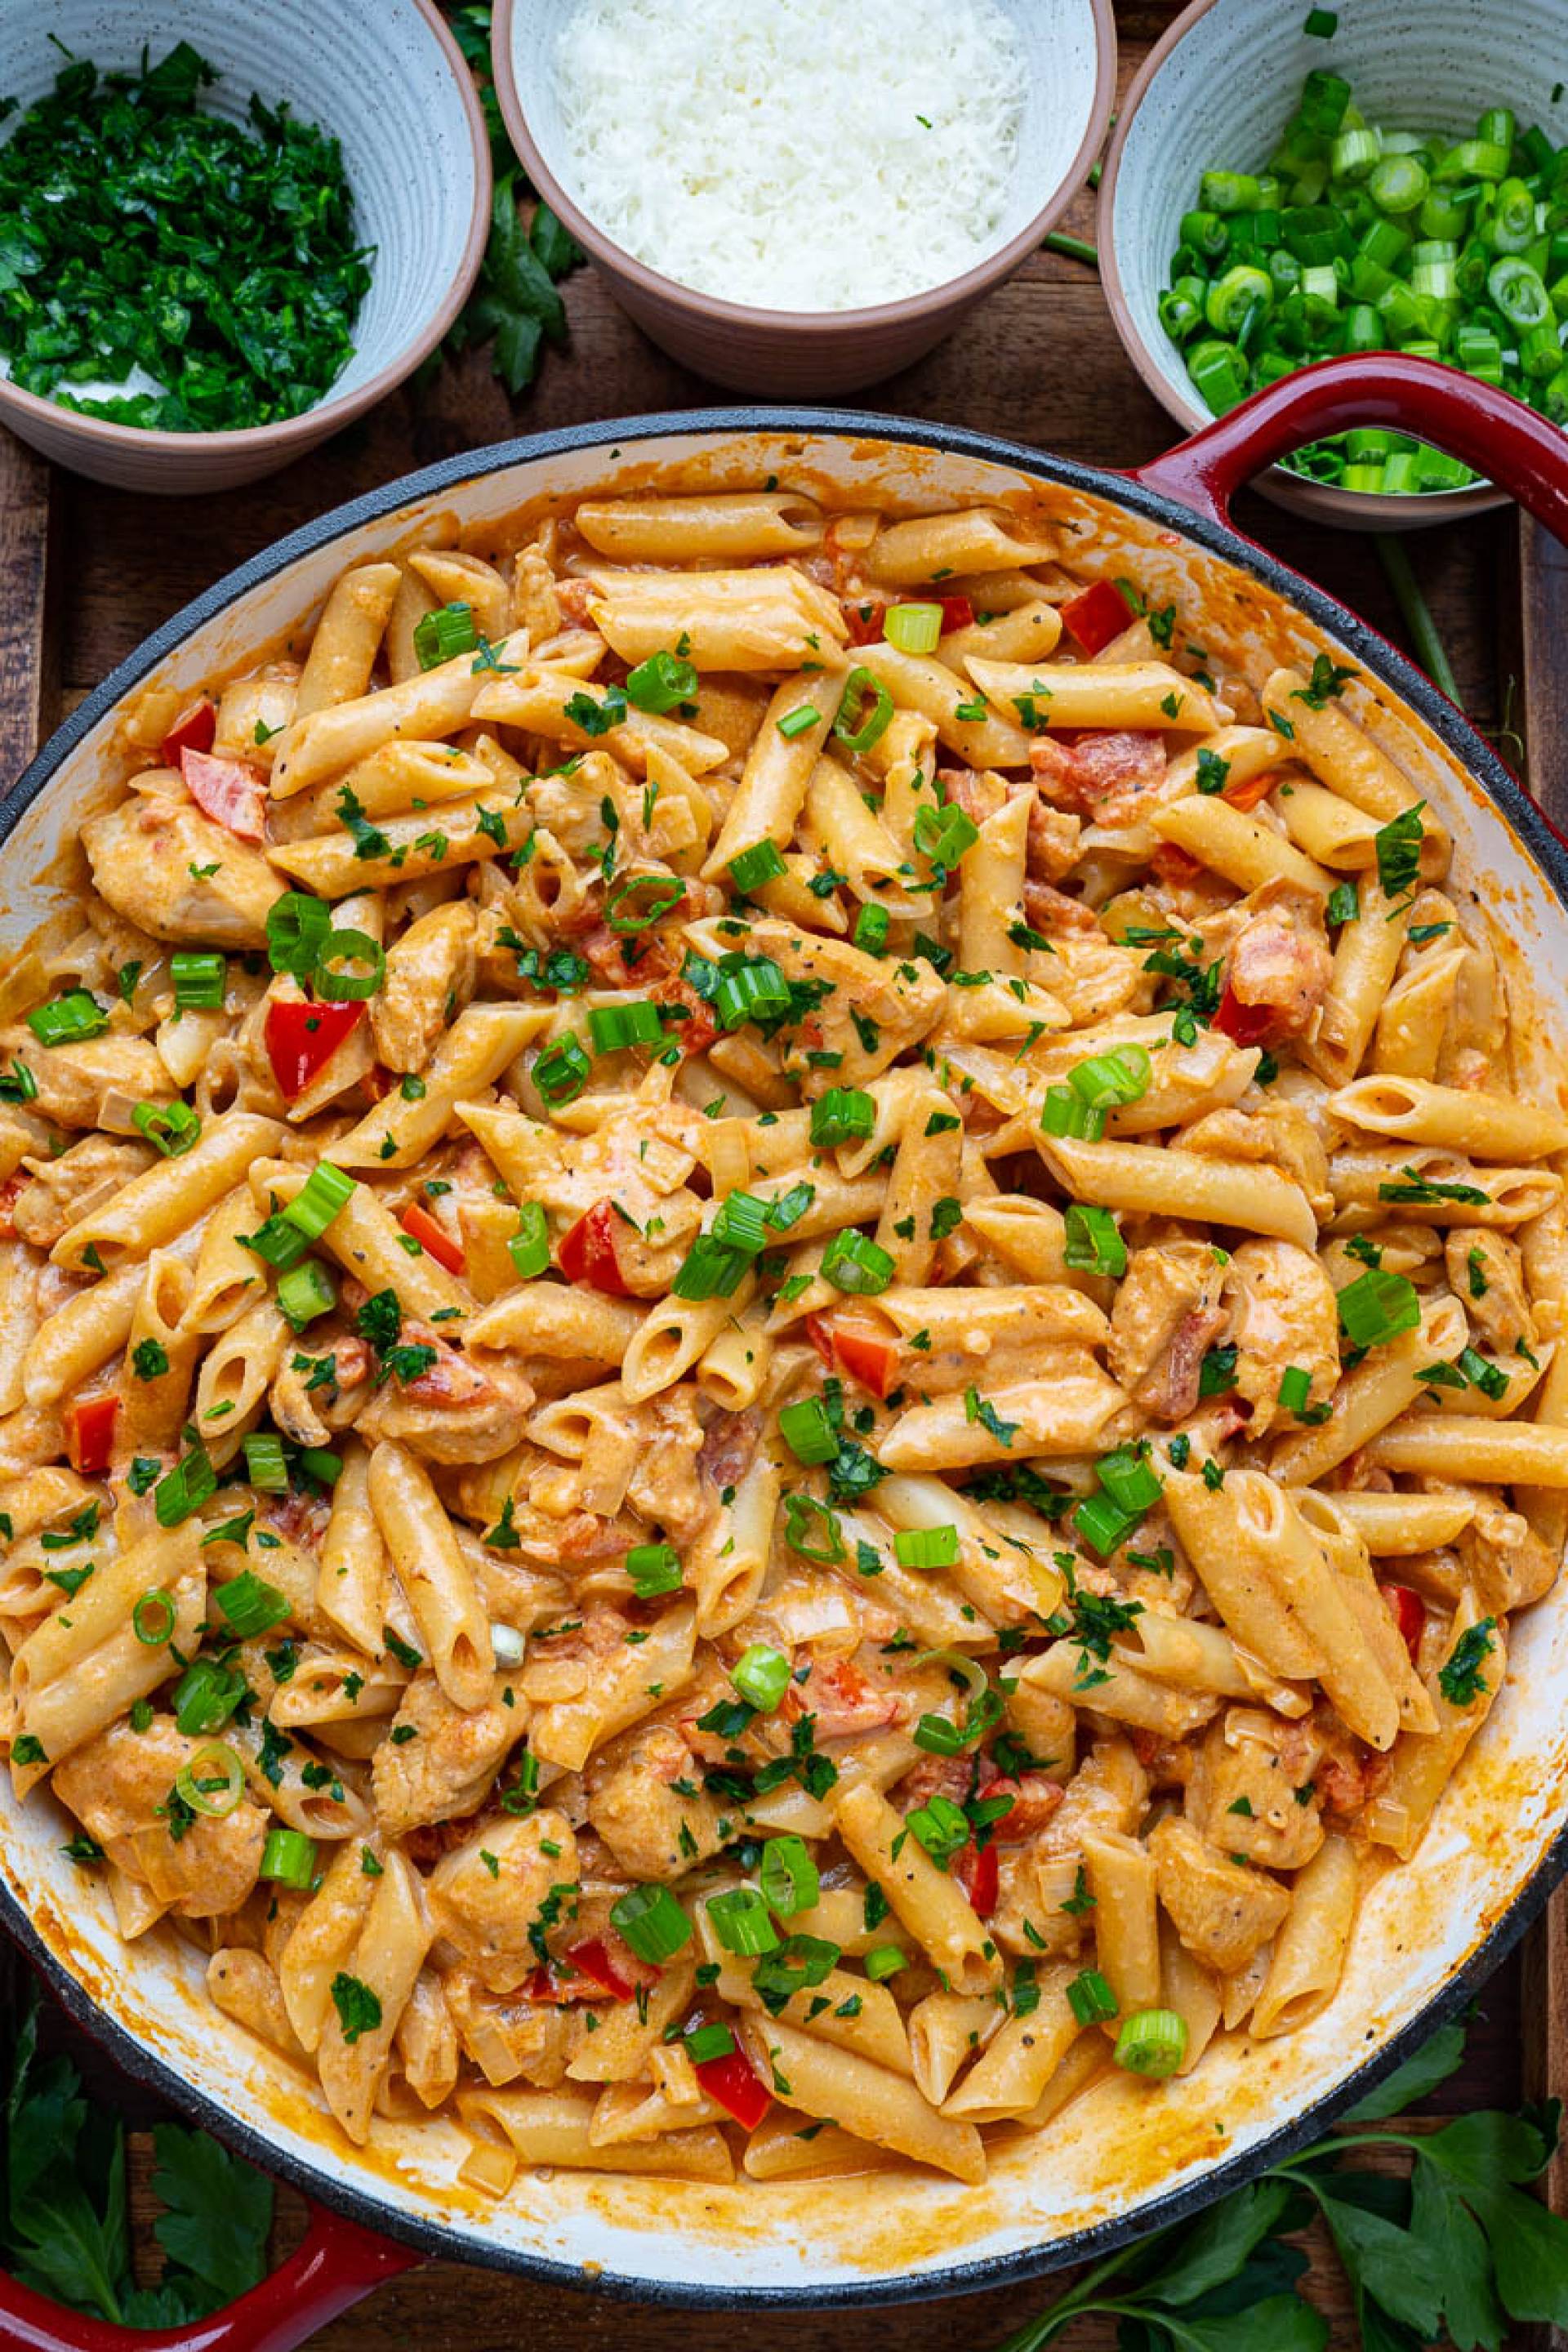 HEALTHY PORTION-Cajun Chicken Pasta...Whole Grain Penne Pasta & Sweet Pepper Brussels Sprouts.